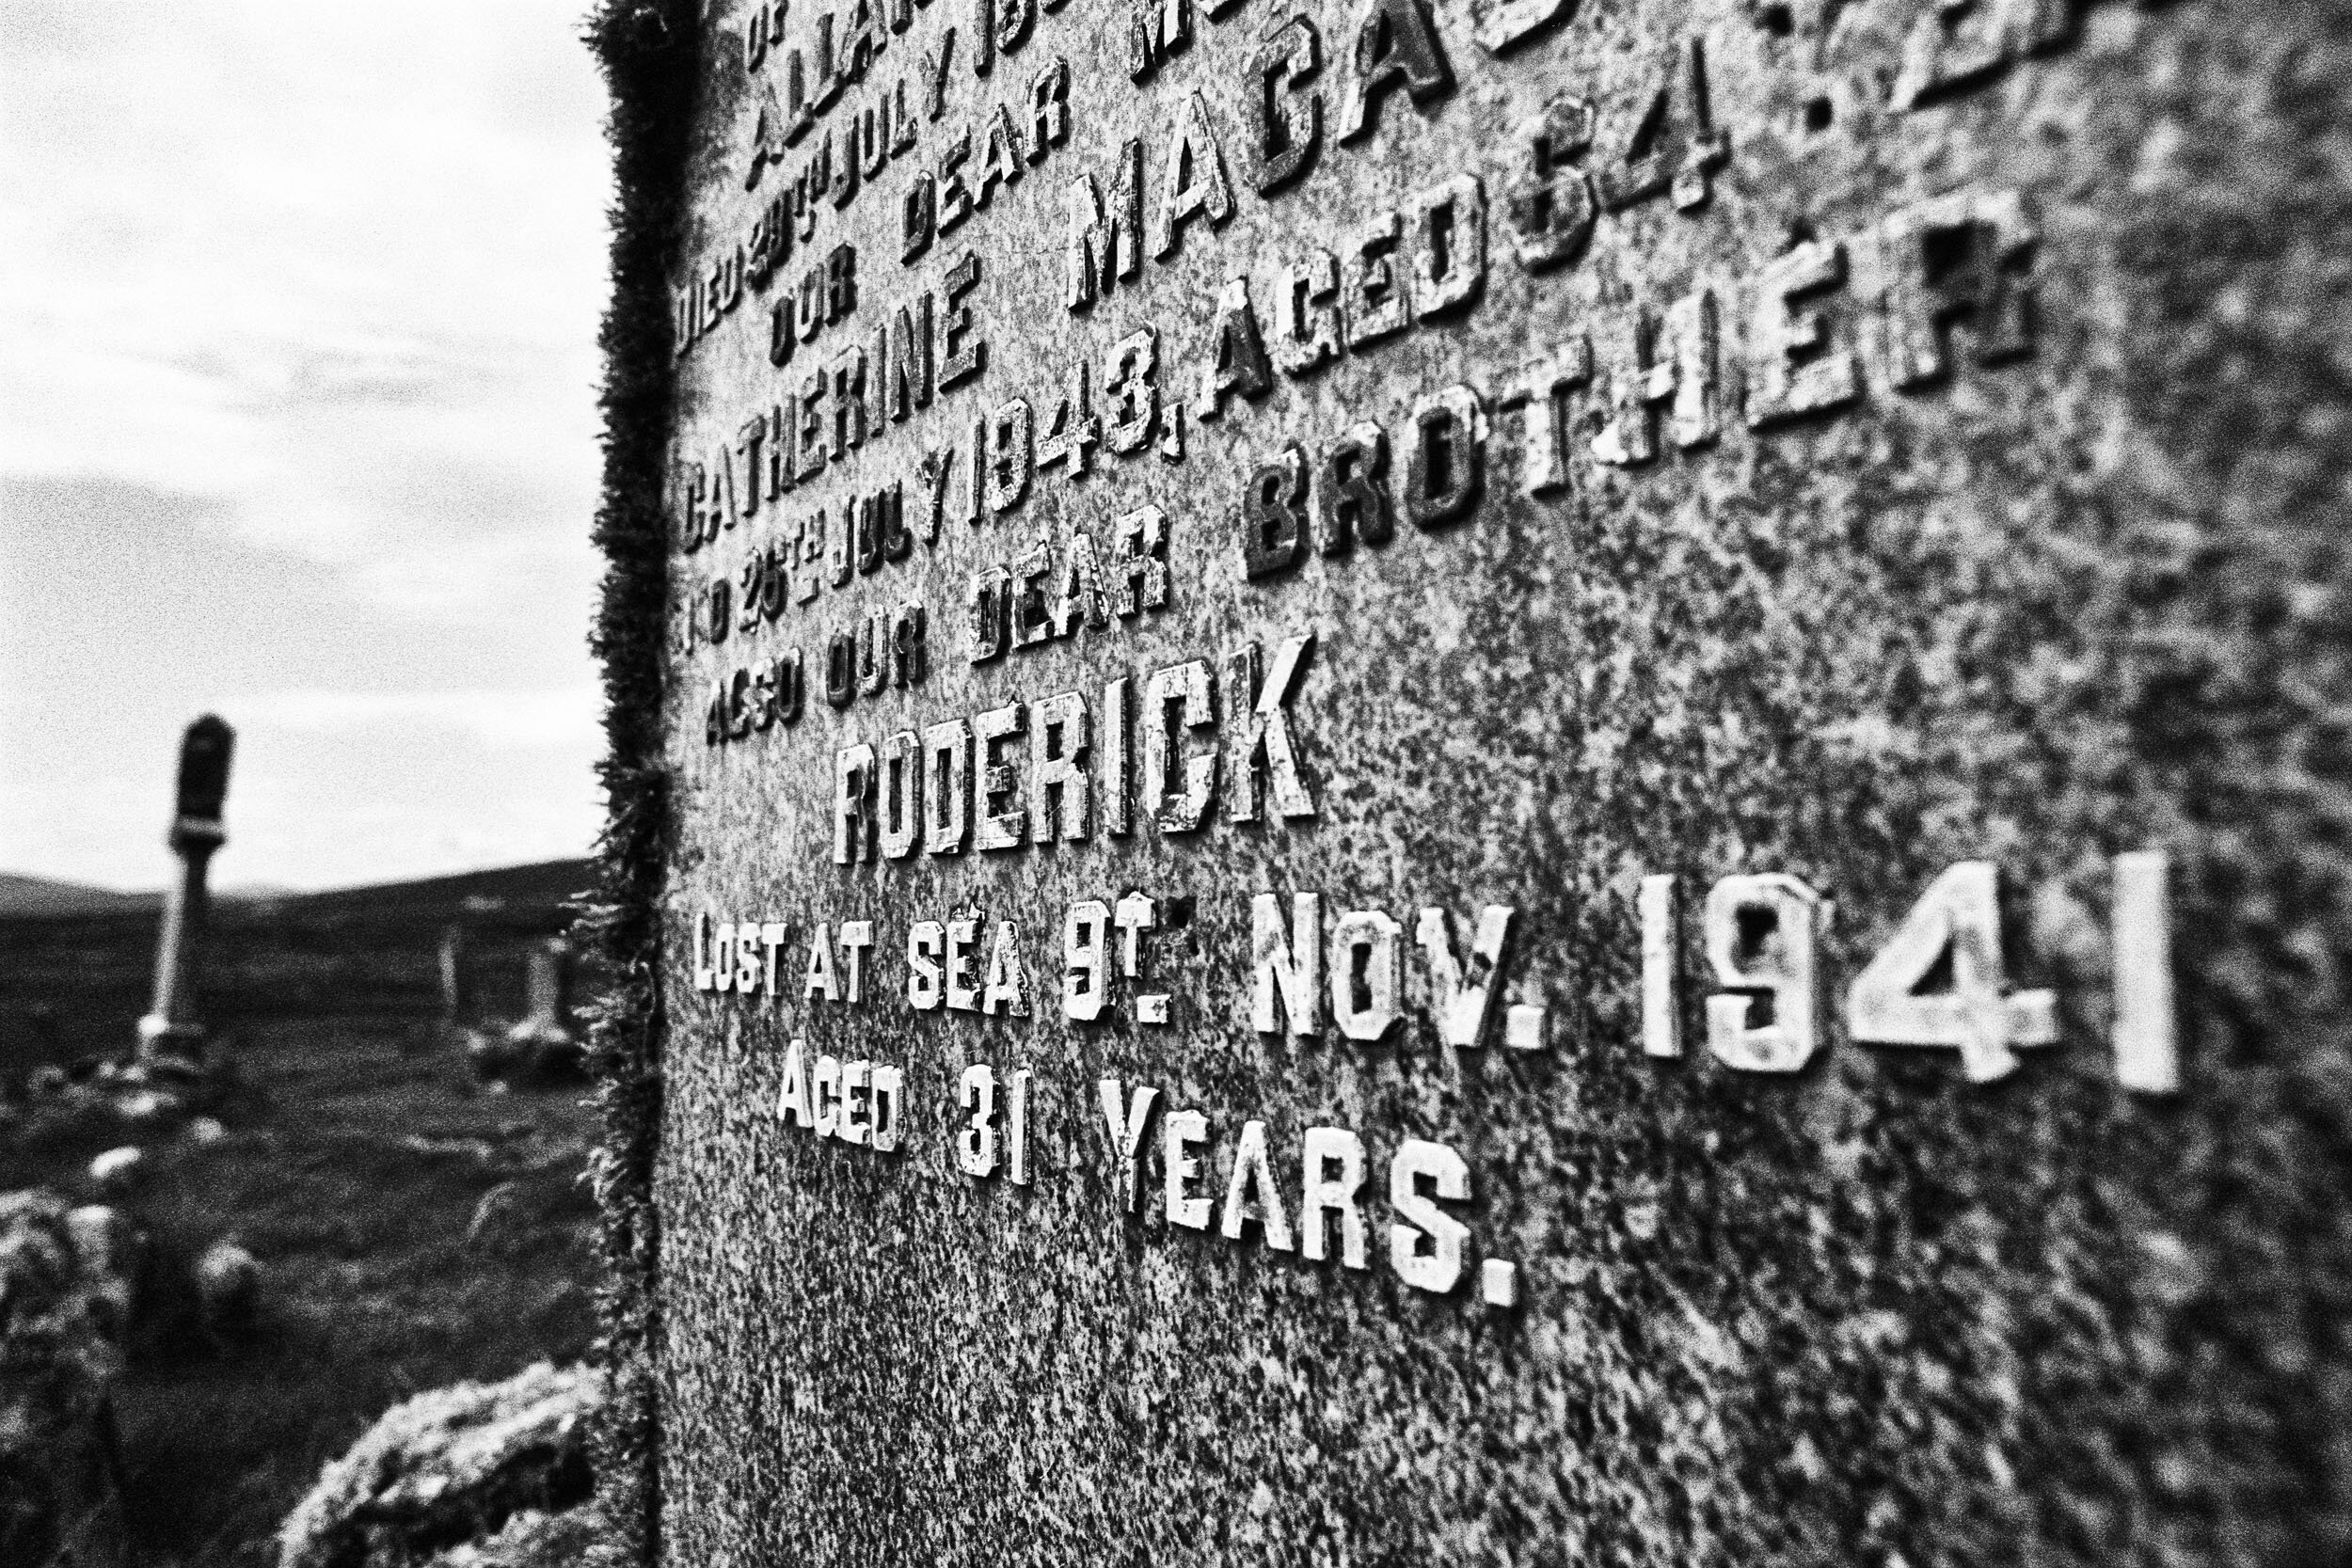  Lost at Sea, Old Burial Ground, Isle of Berneray, 2019 